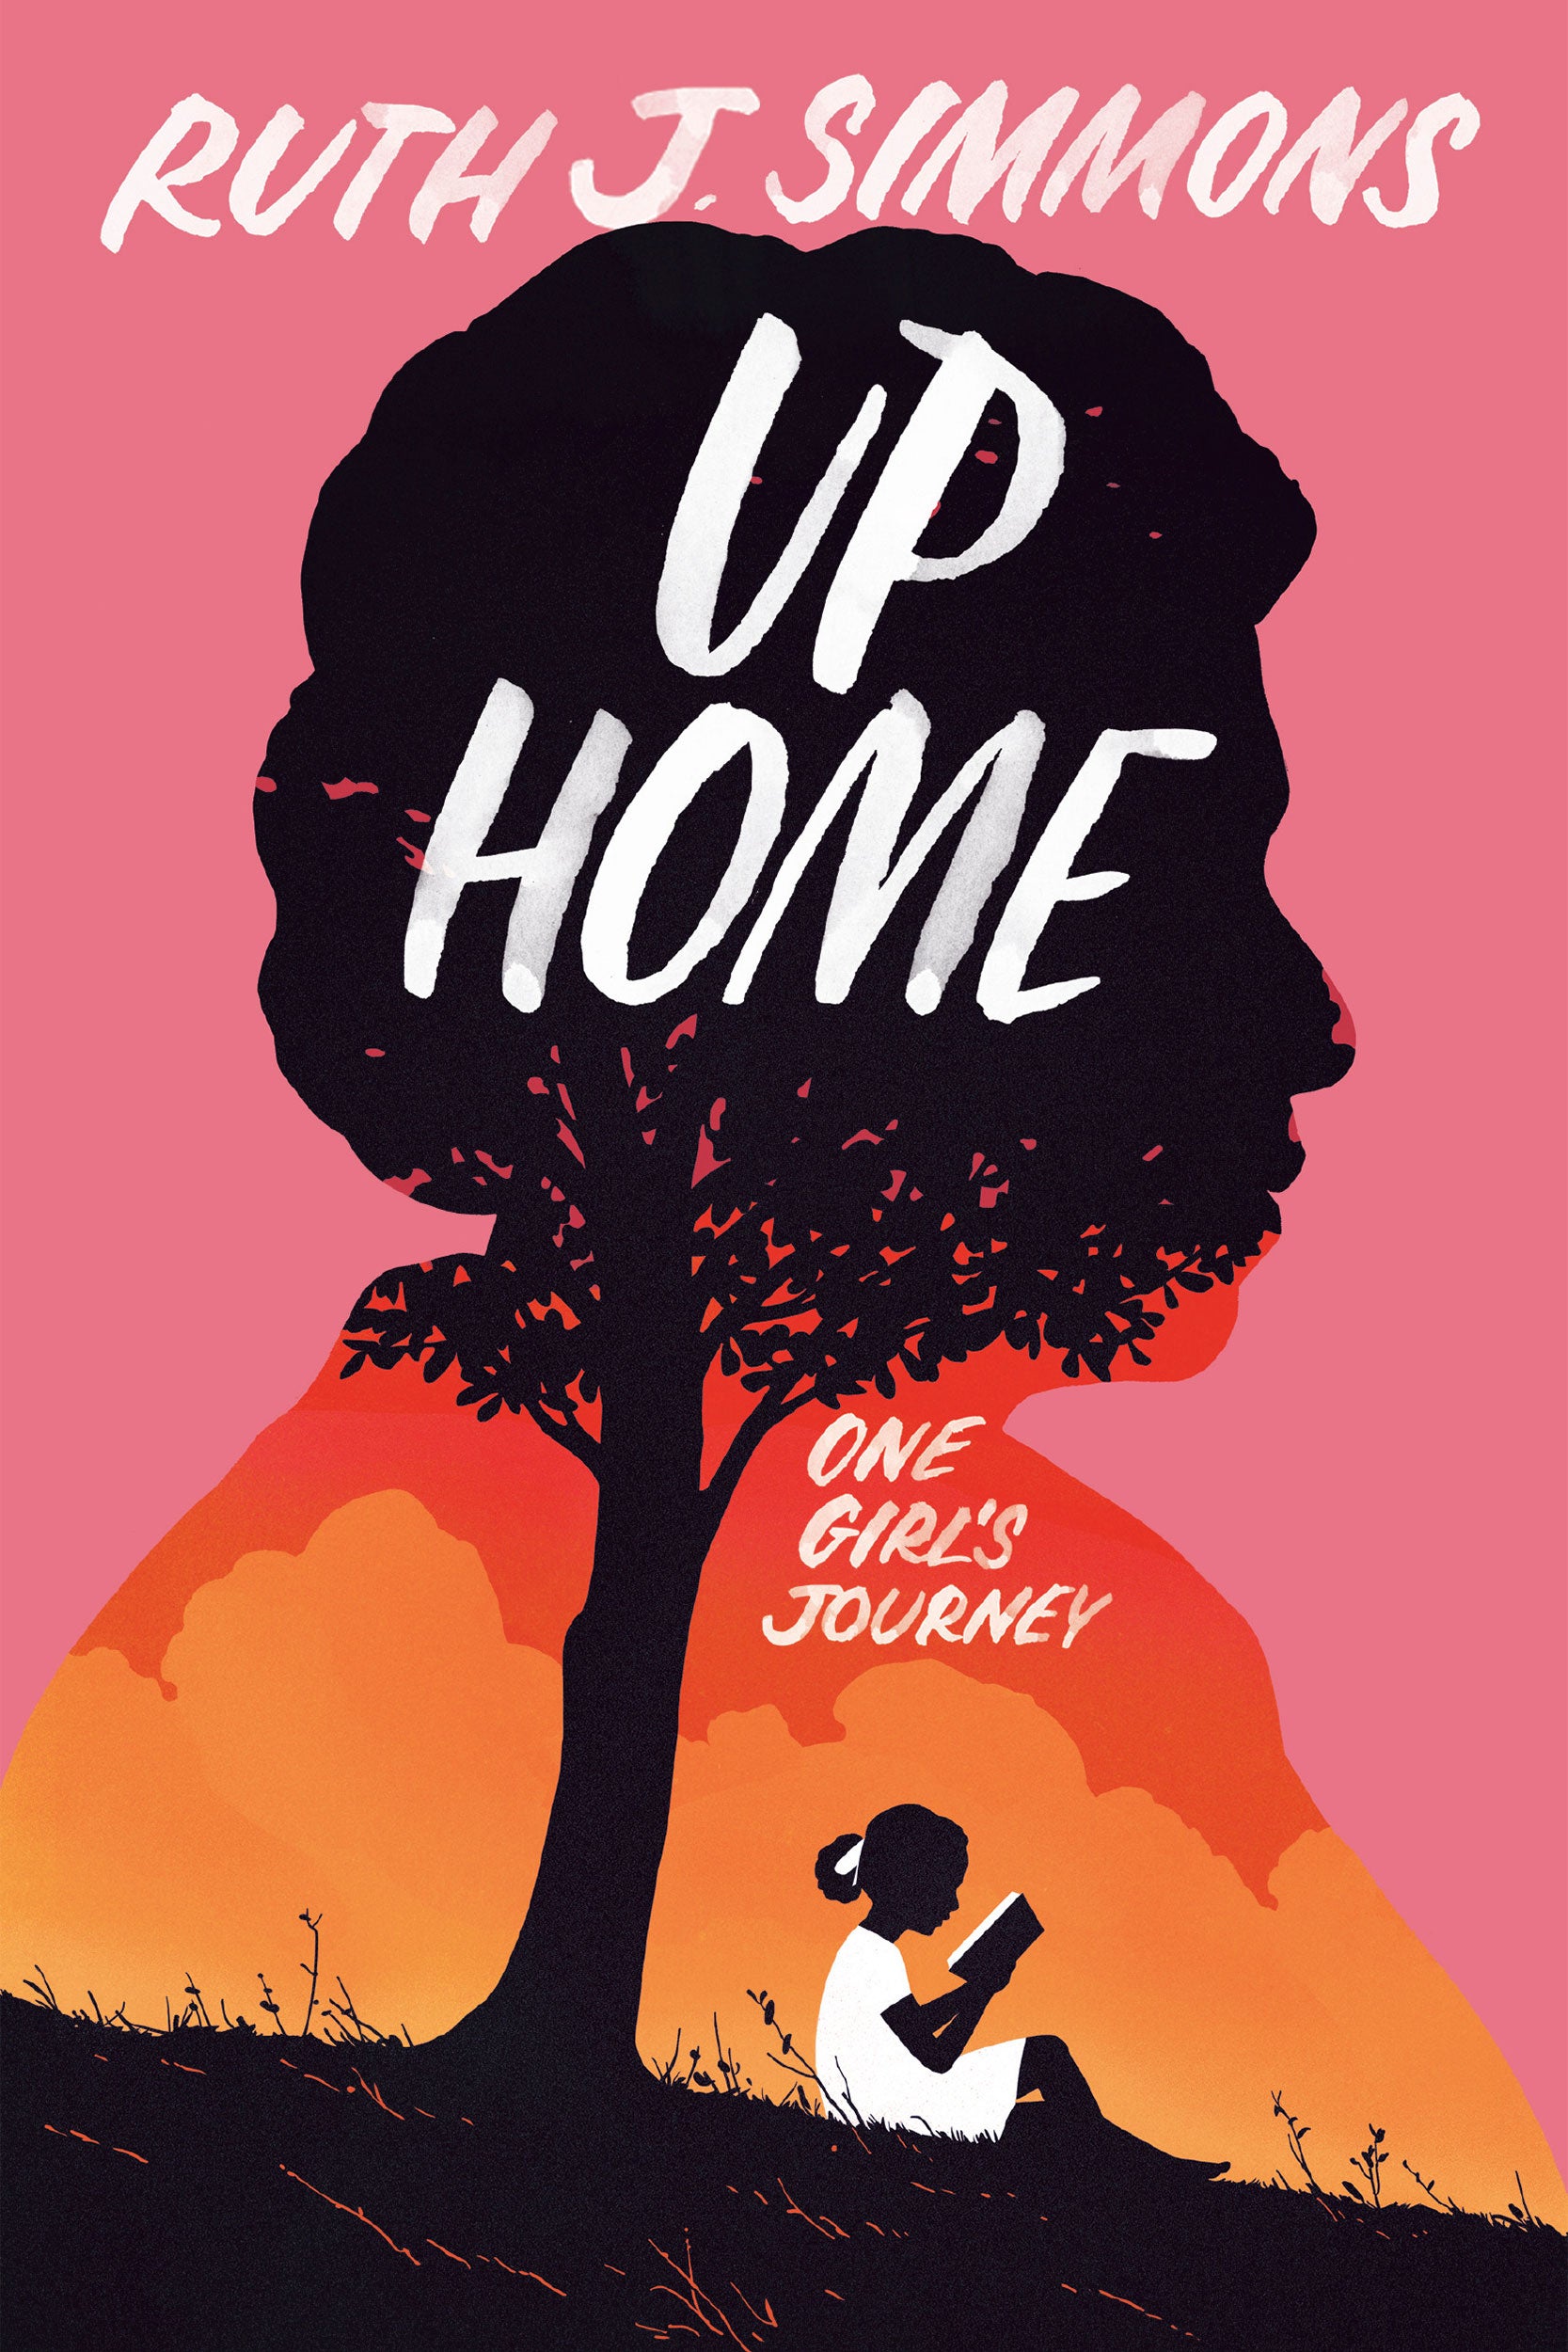 Book cover for Up Home by Ruth Simmons.